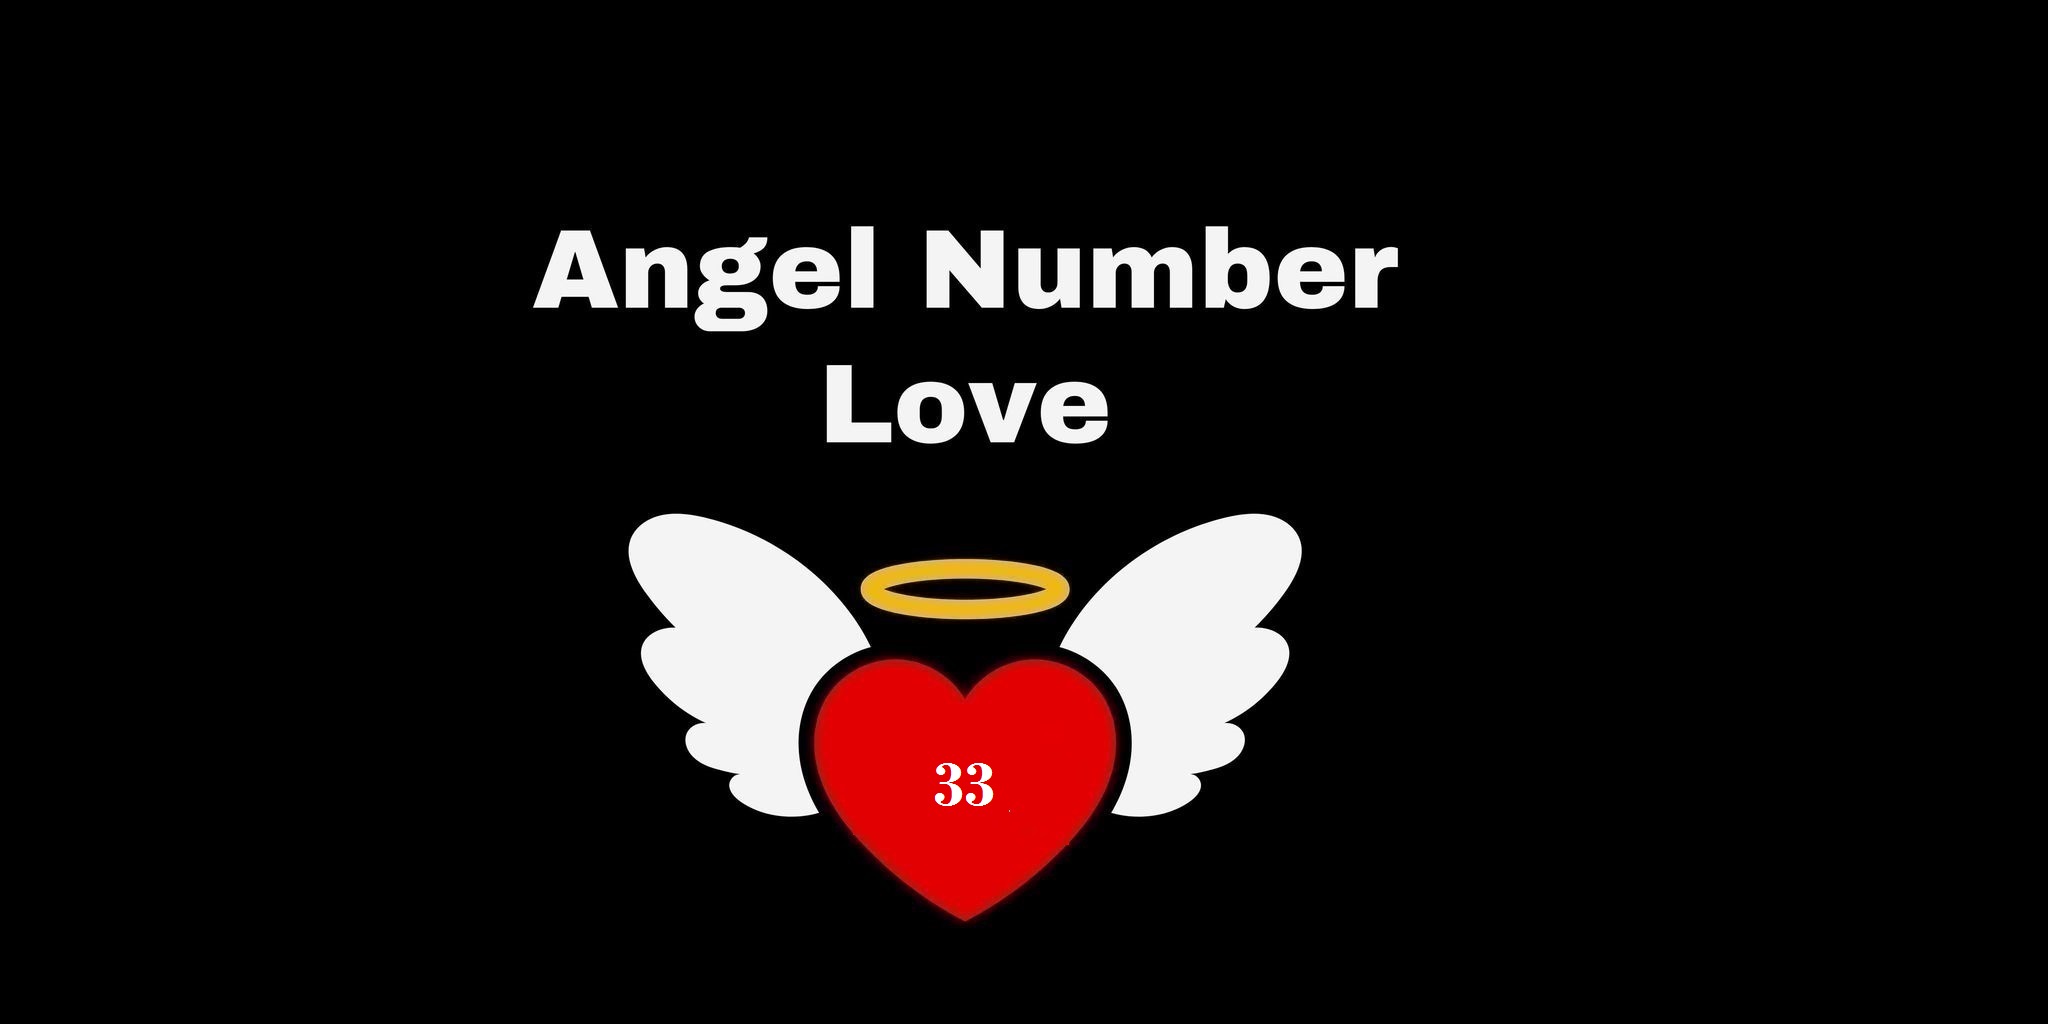 33 Angel Number Meaning In Love